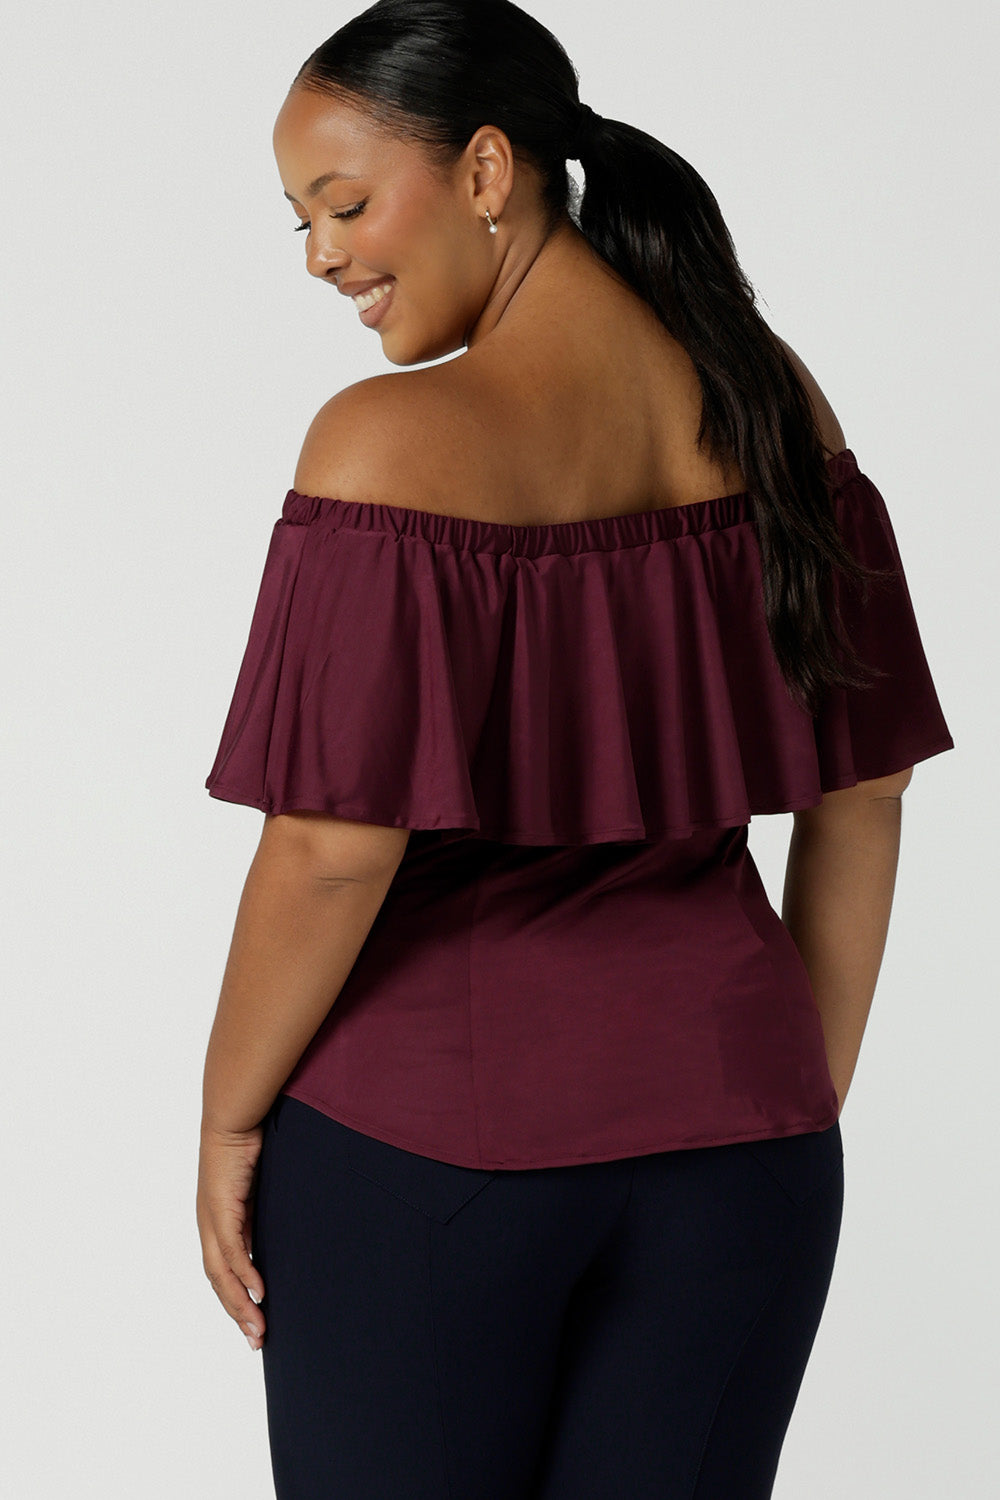 Back view of a plus size, size 18 woman wearing an off-the-shoulder top in plum slinky jersey. Worn with navy blue slim leg pants both are made in Australia by Australian and New Zealand women's clothing brand, Leina & Fleur. 